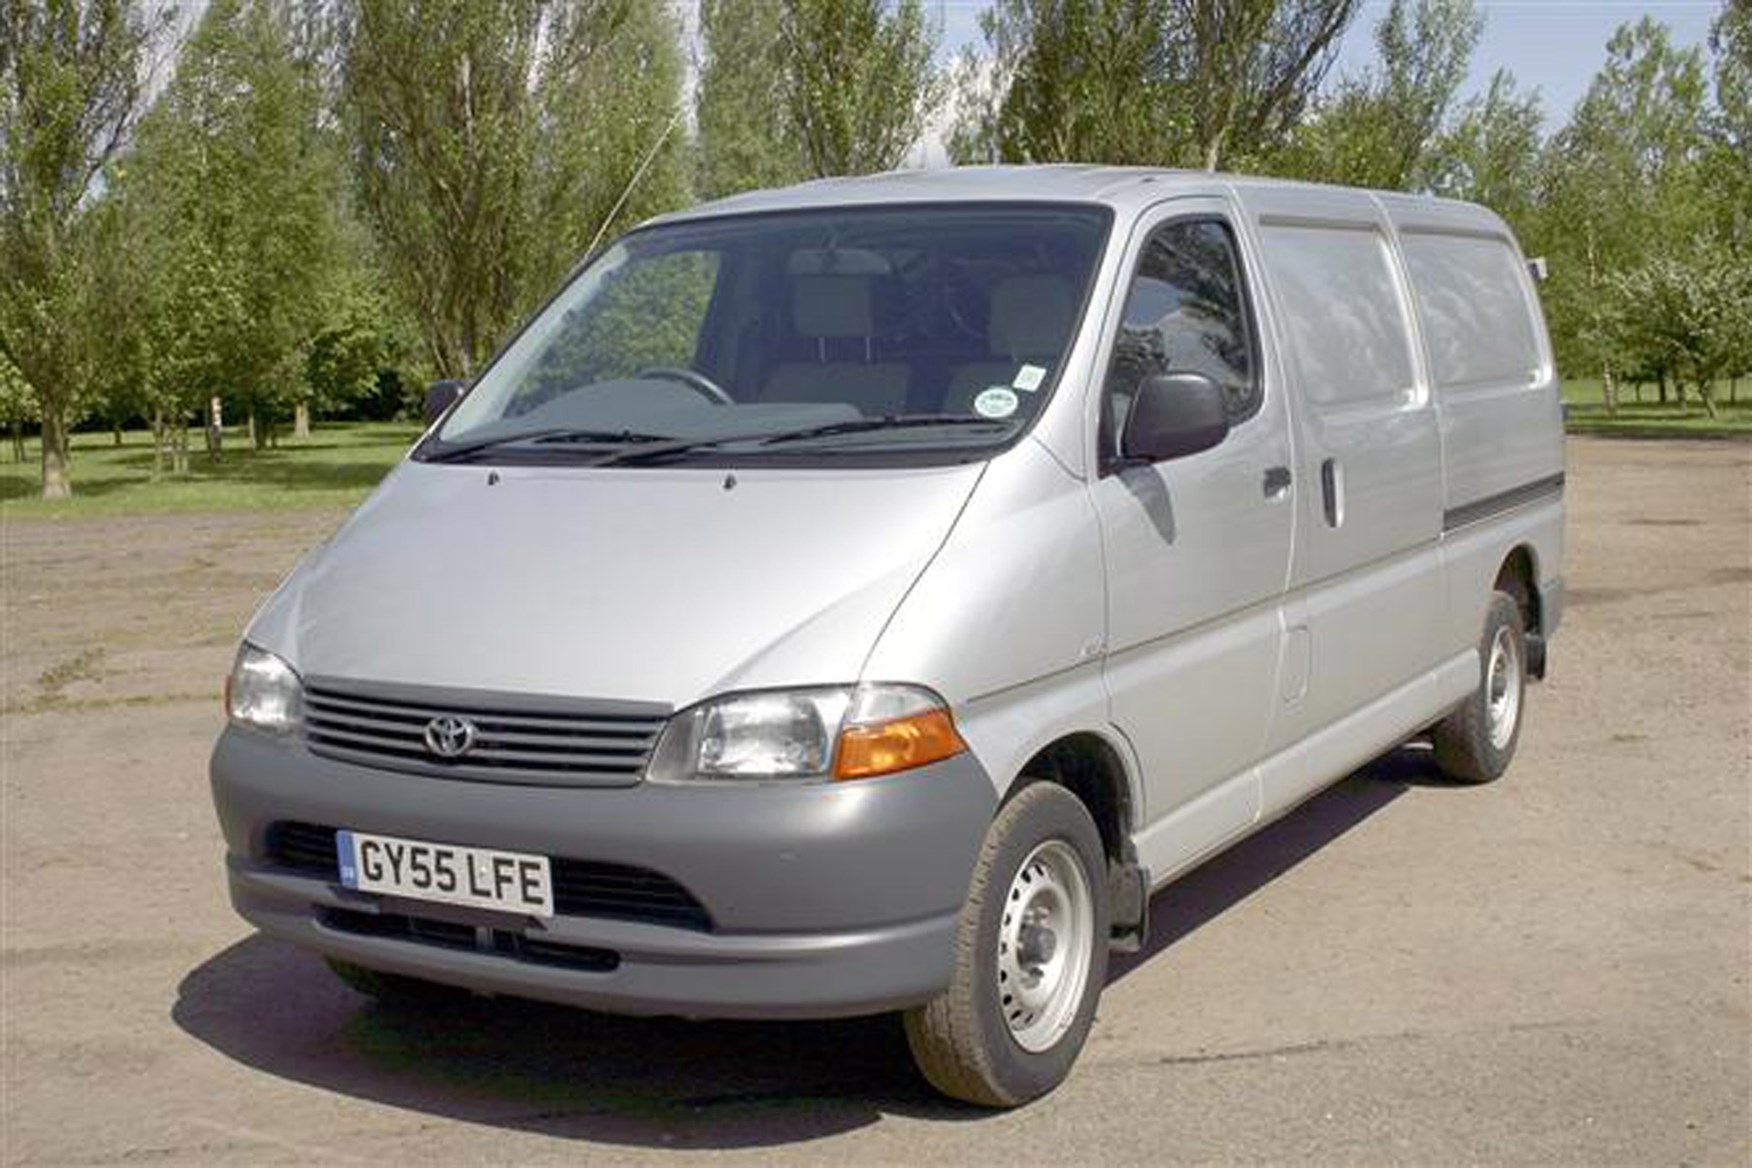 Toyota Hiace review on Parkers Vans - exterior